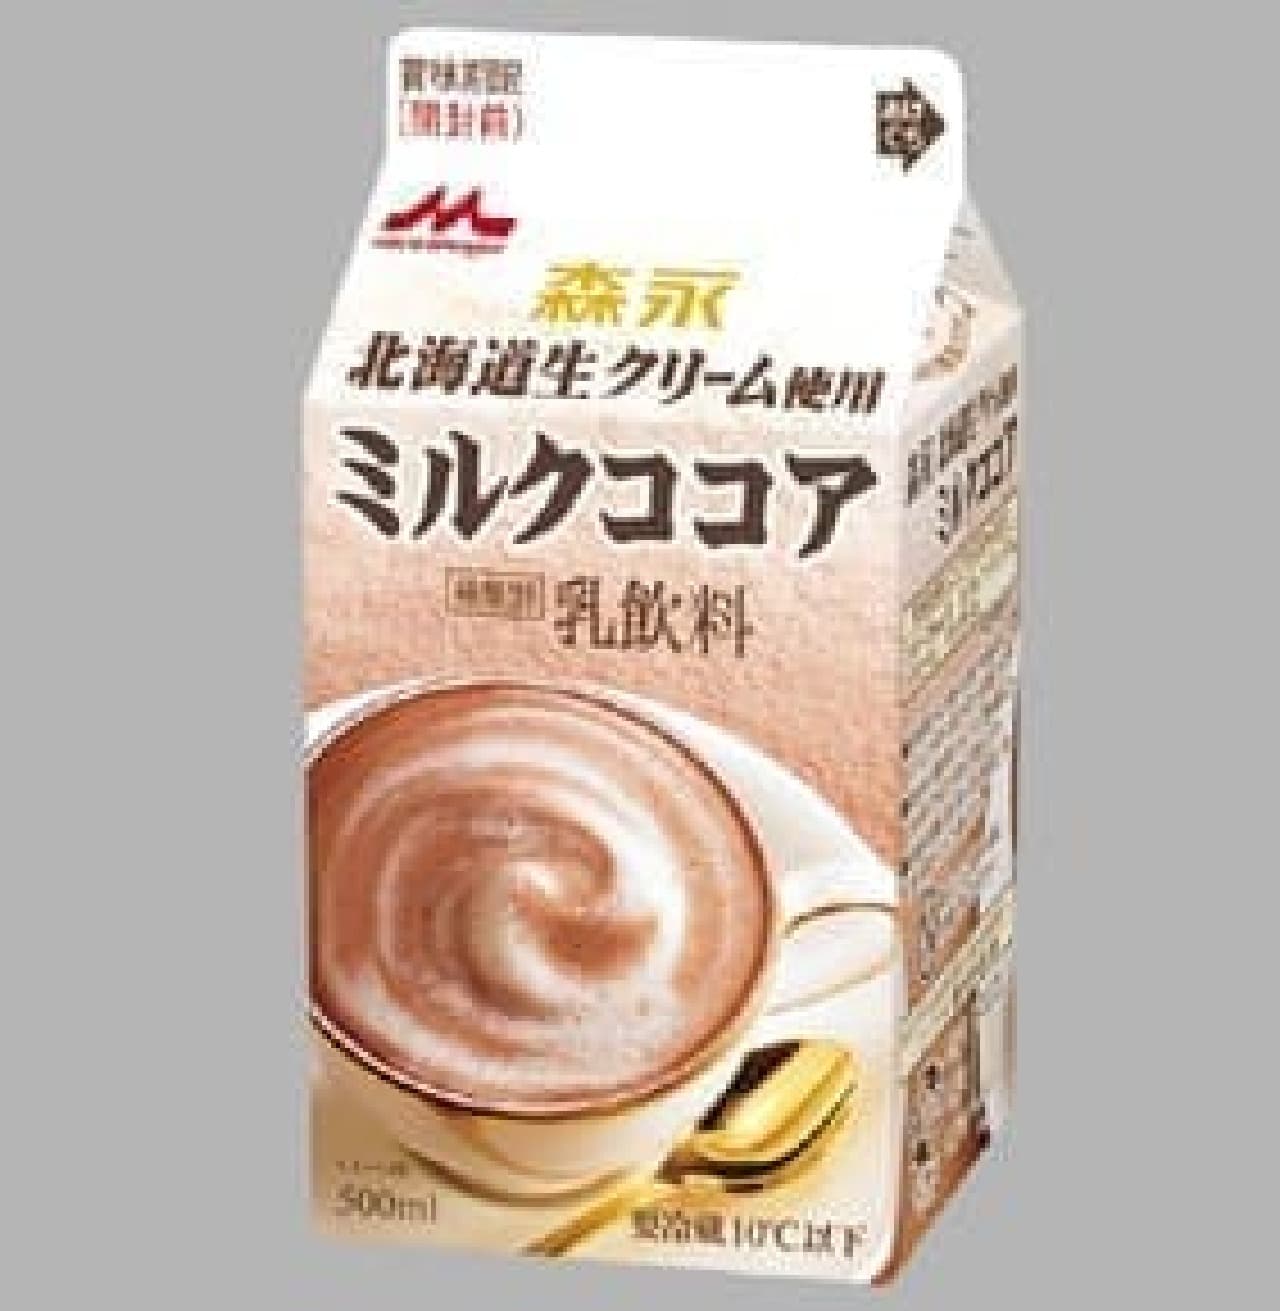 Cocoa made by a dairy maker with a focus on "milk"?